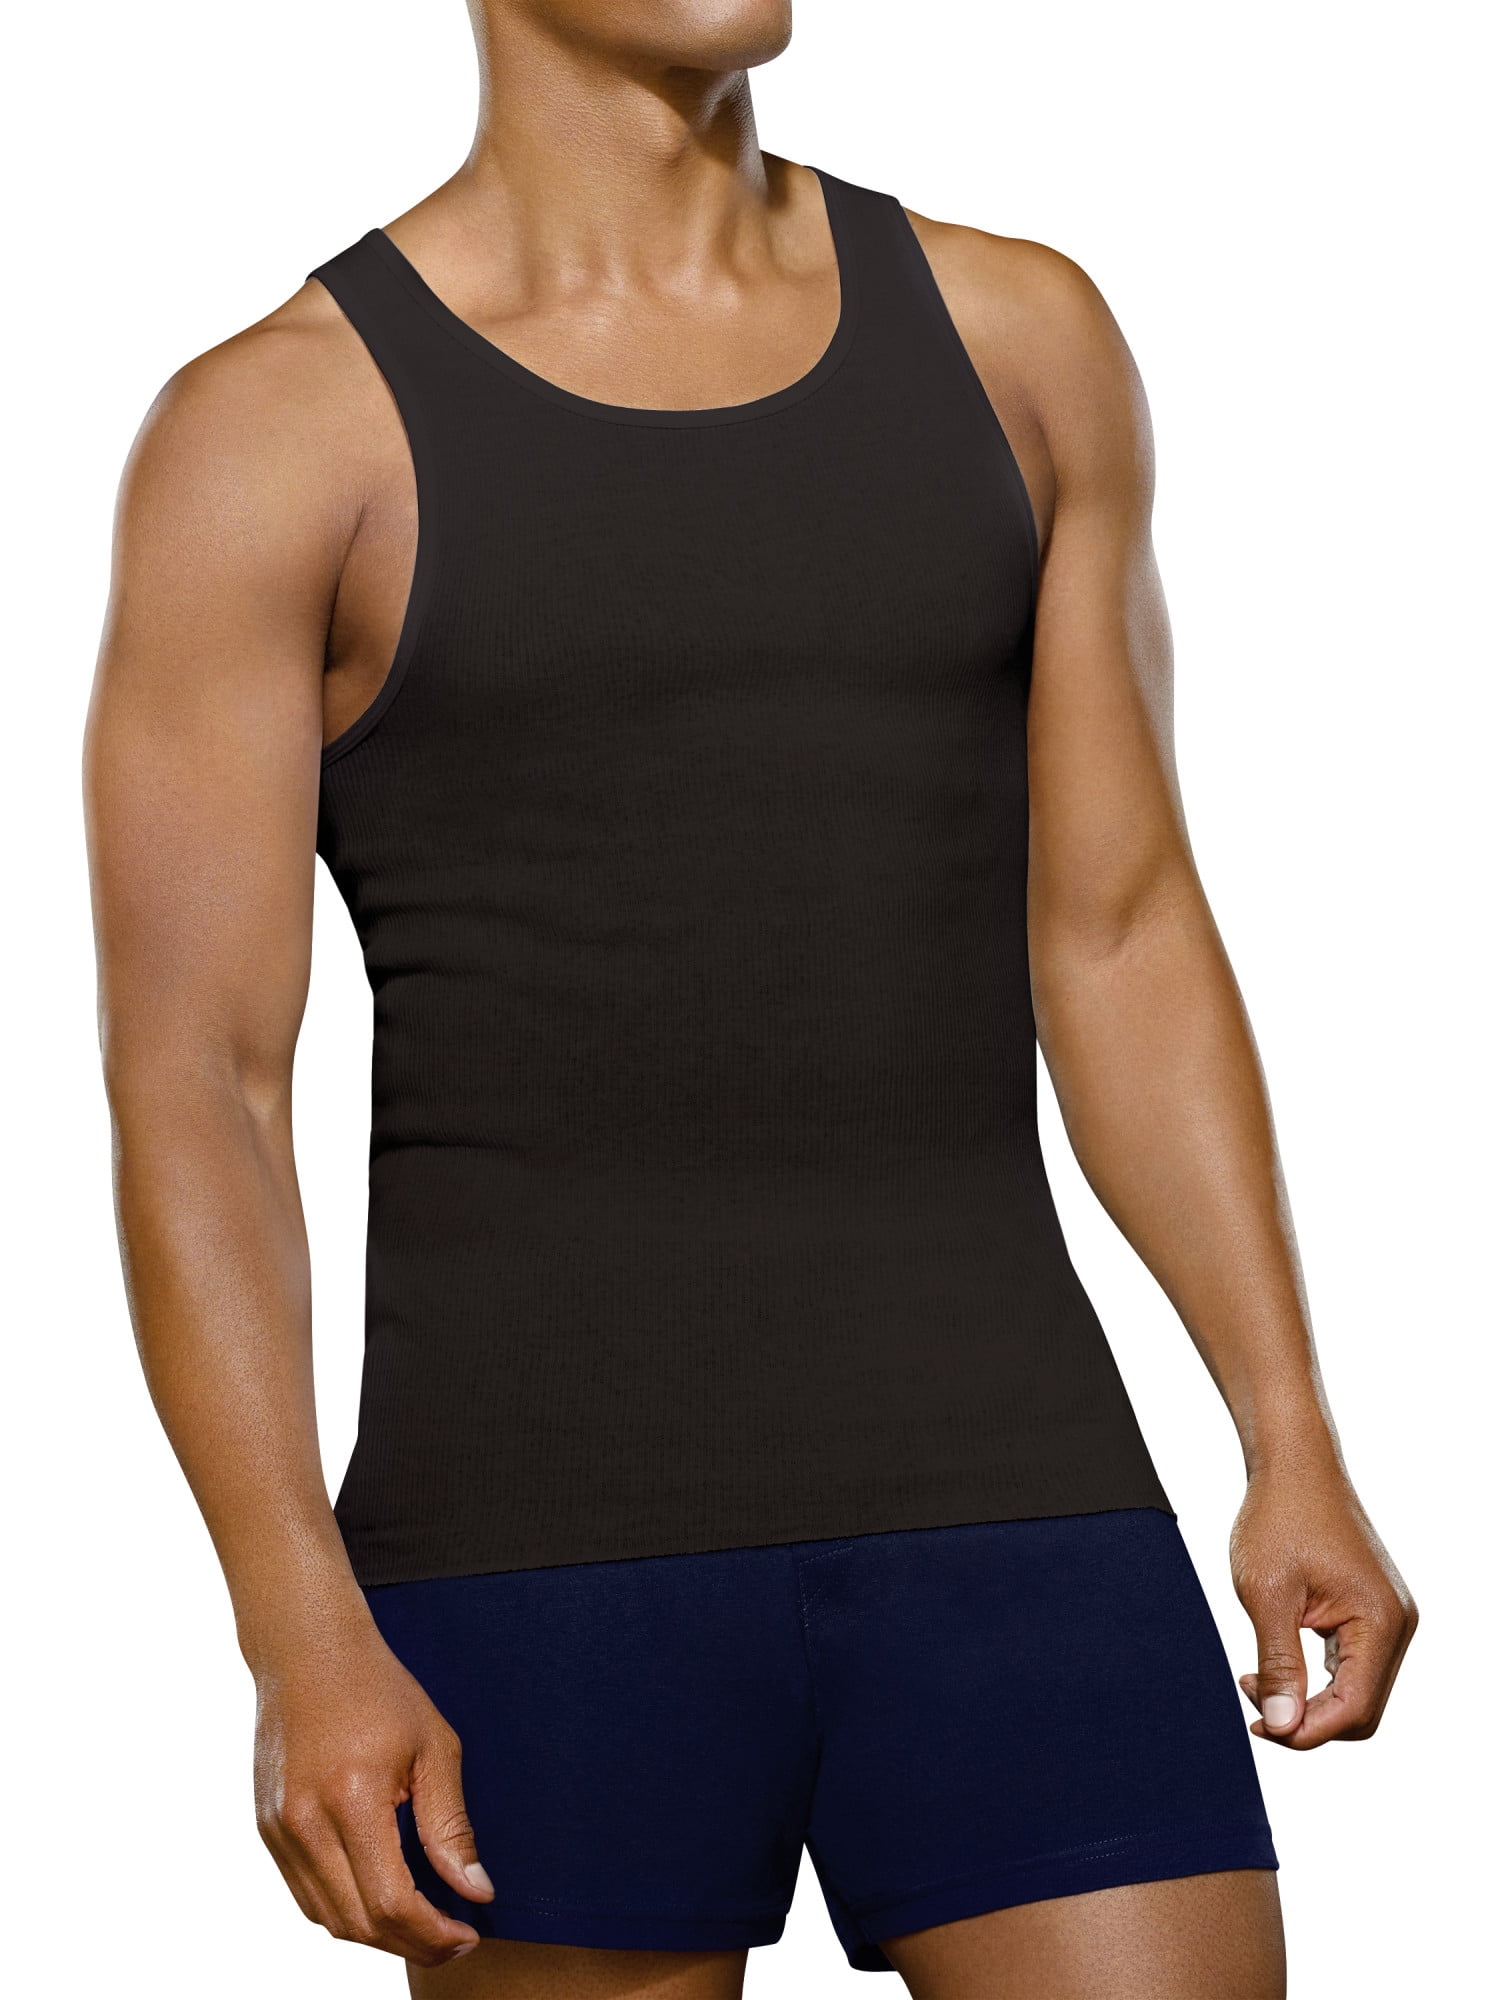 Men's Black and Gray A-Shirts, 4 Pack 